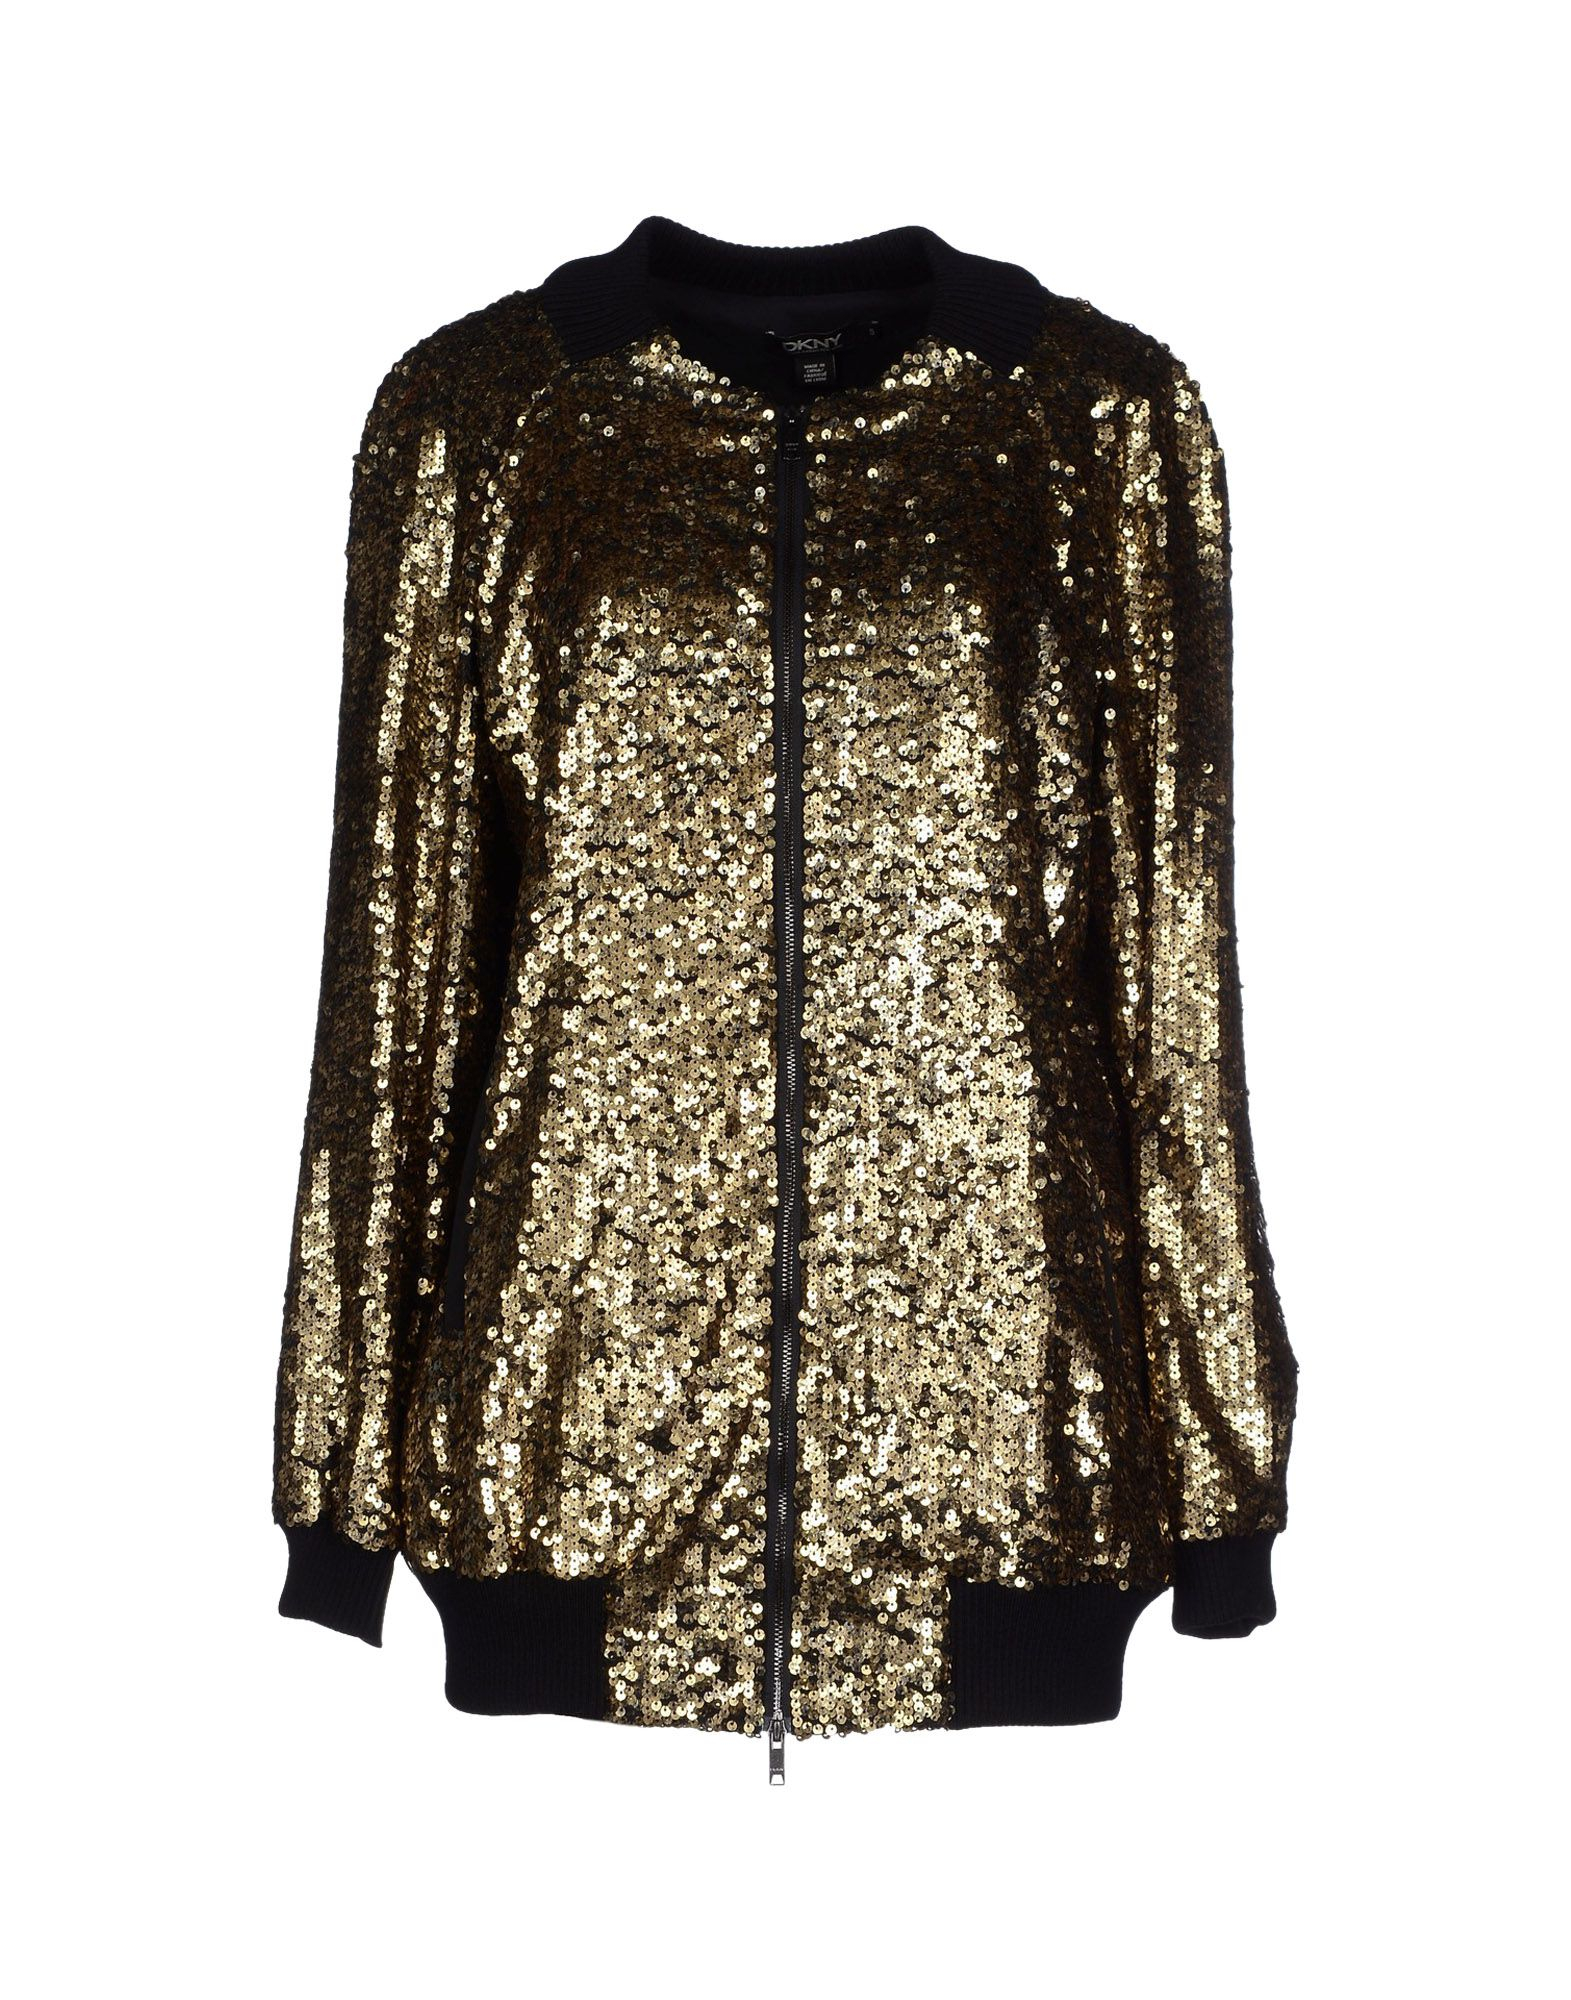 DKNY Sequined Stretch-silk Bomber Jacket in Gold (Metallic) - Lyst